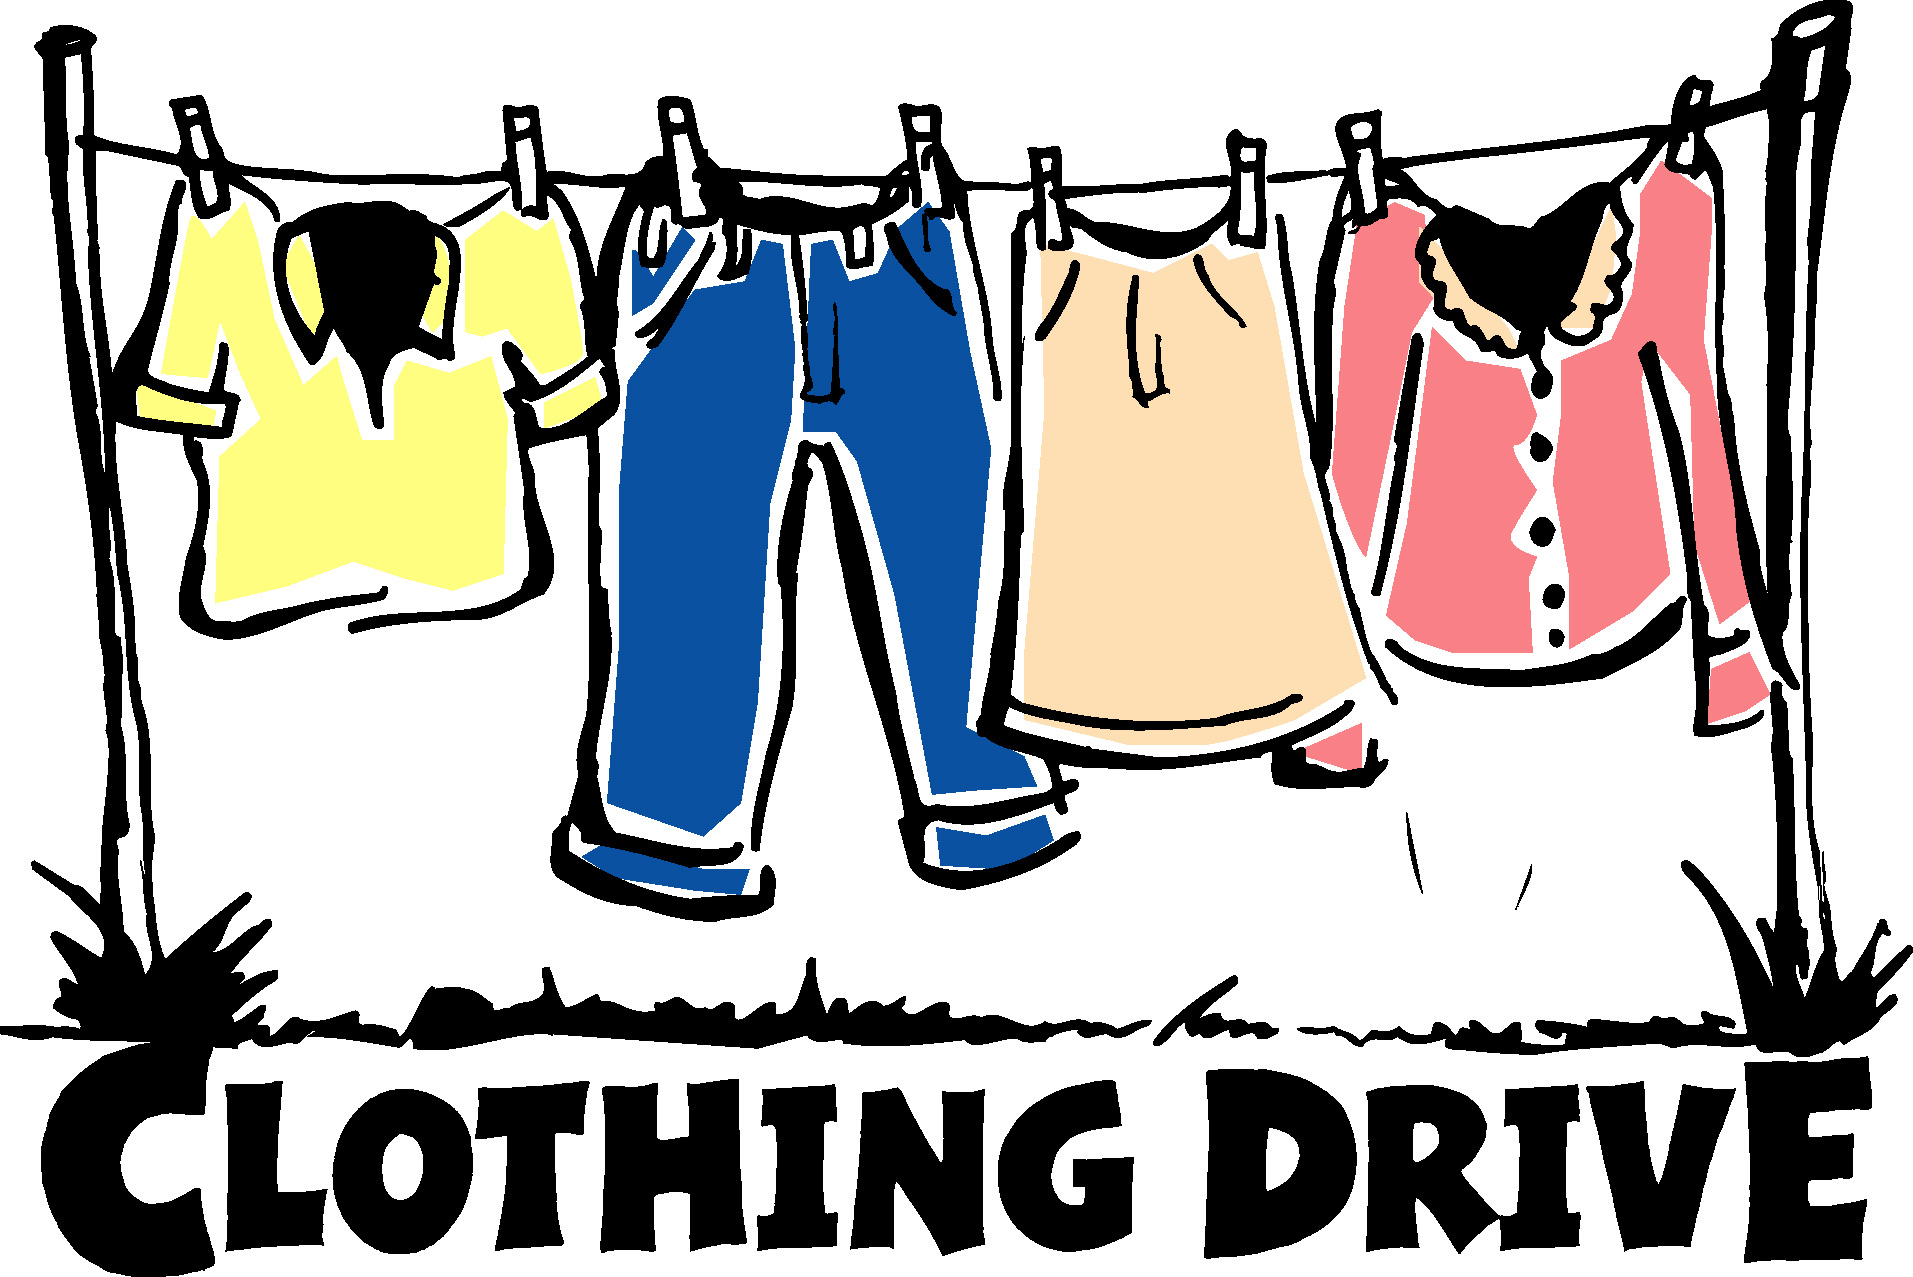 Clothing drive clipart